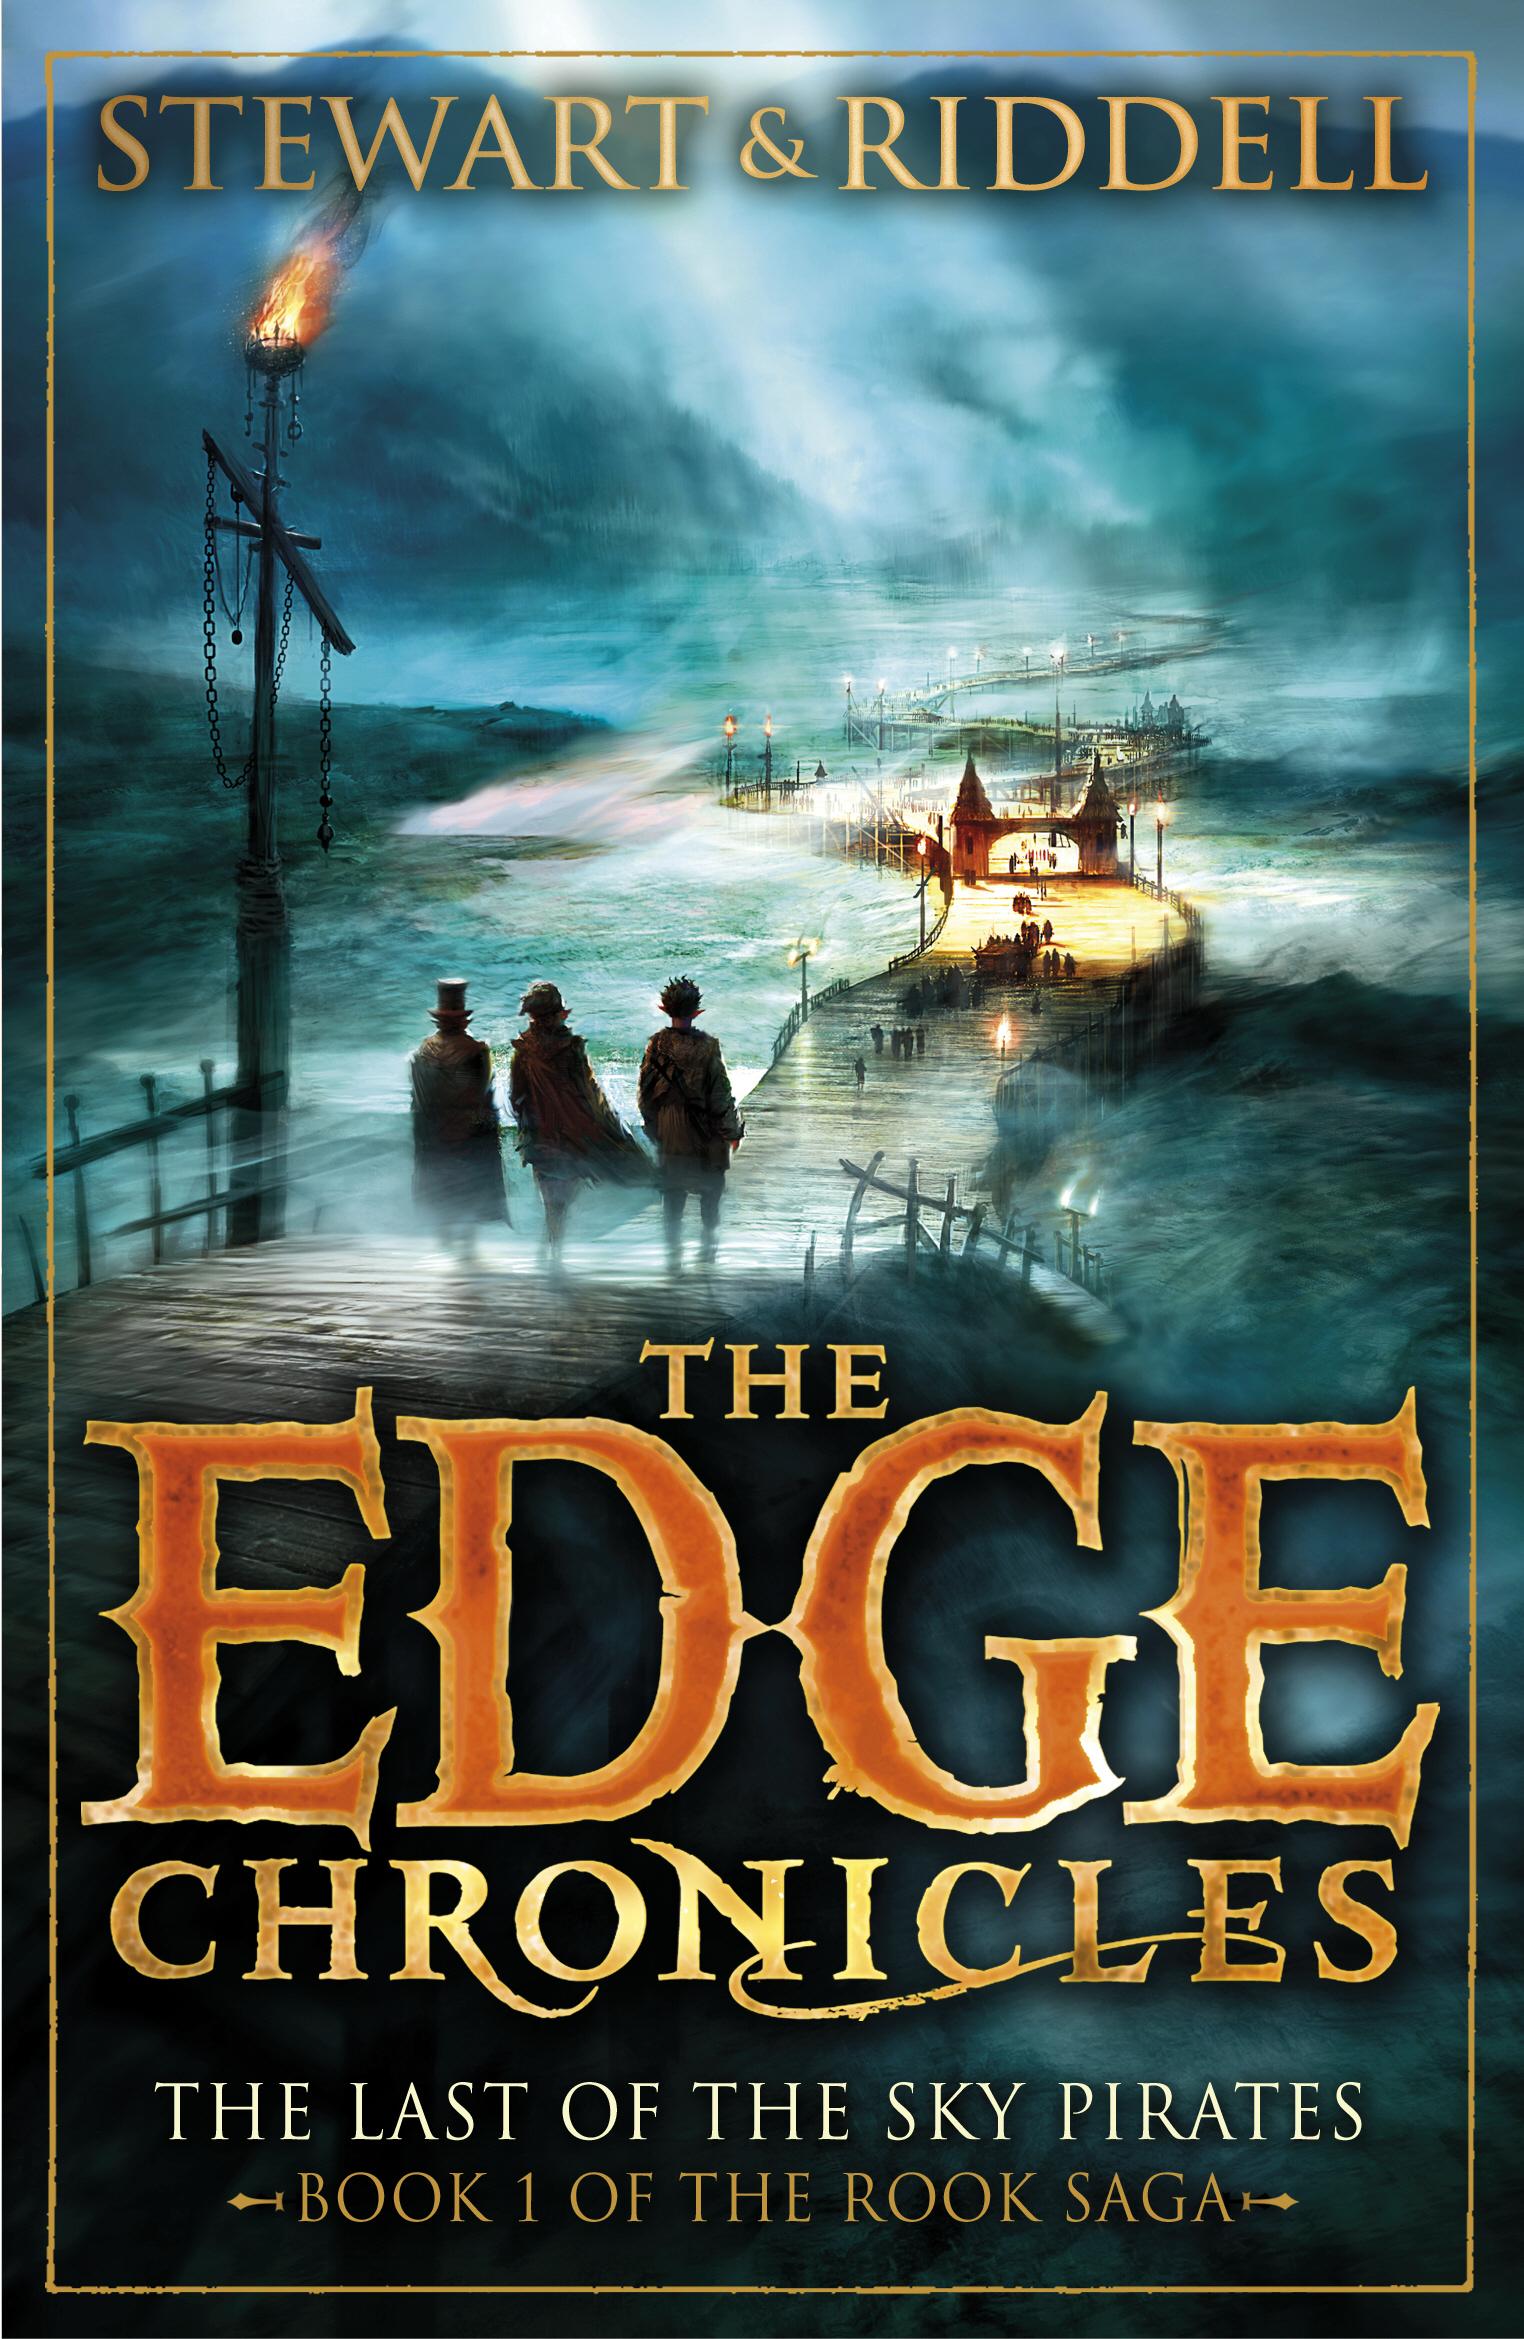 Edge Chronicles 7: The Last of the Sky Pirates - Paul Stewart